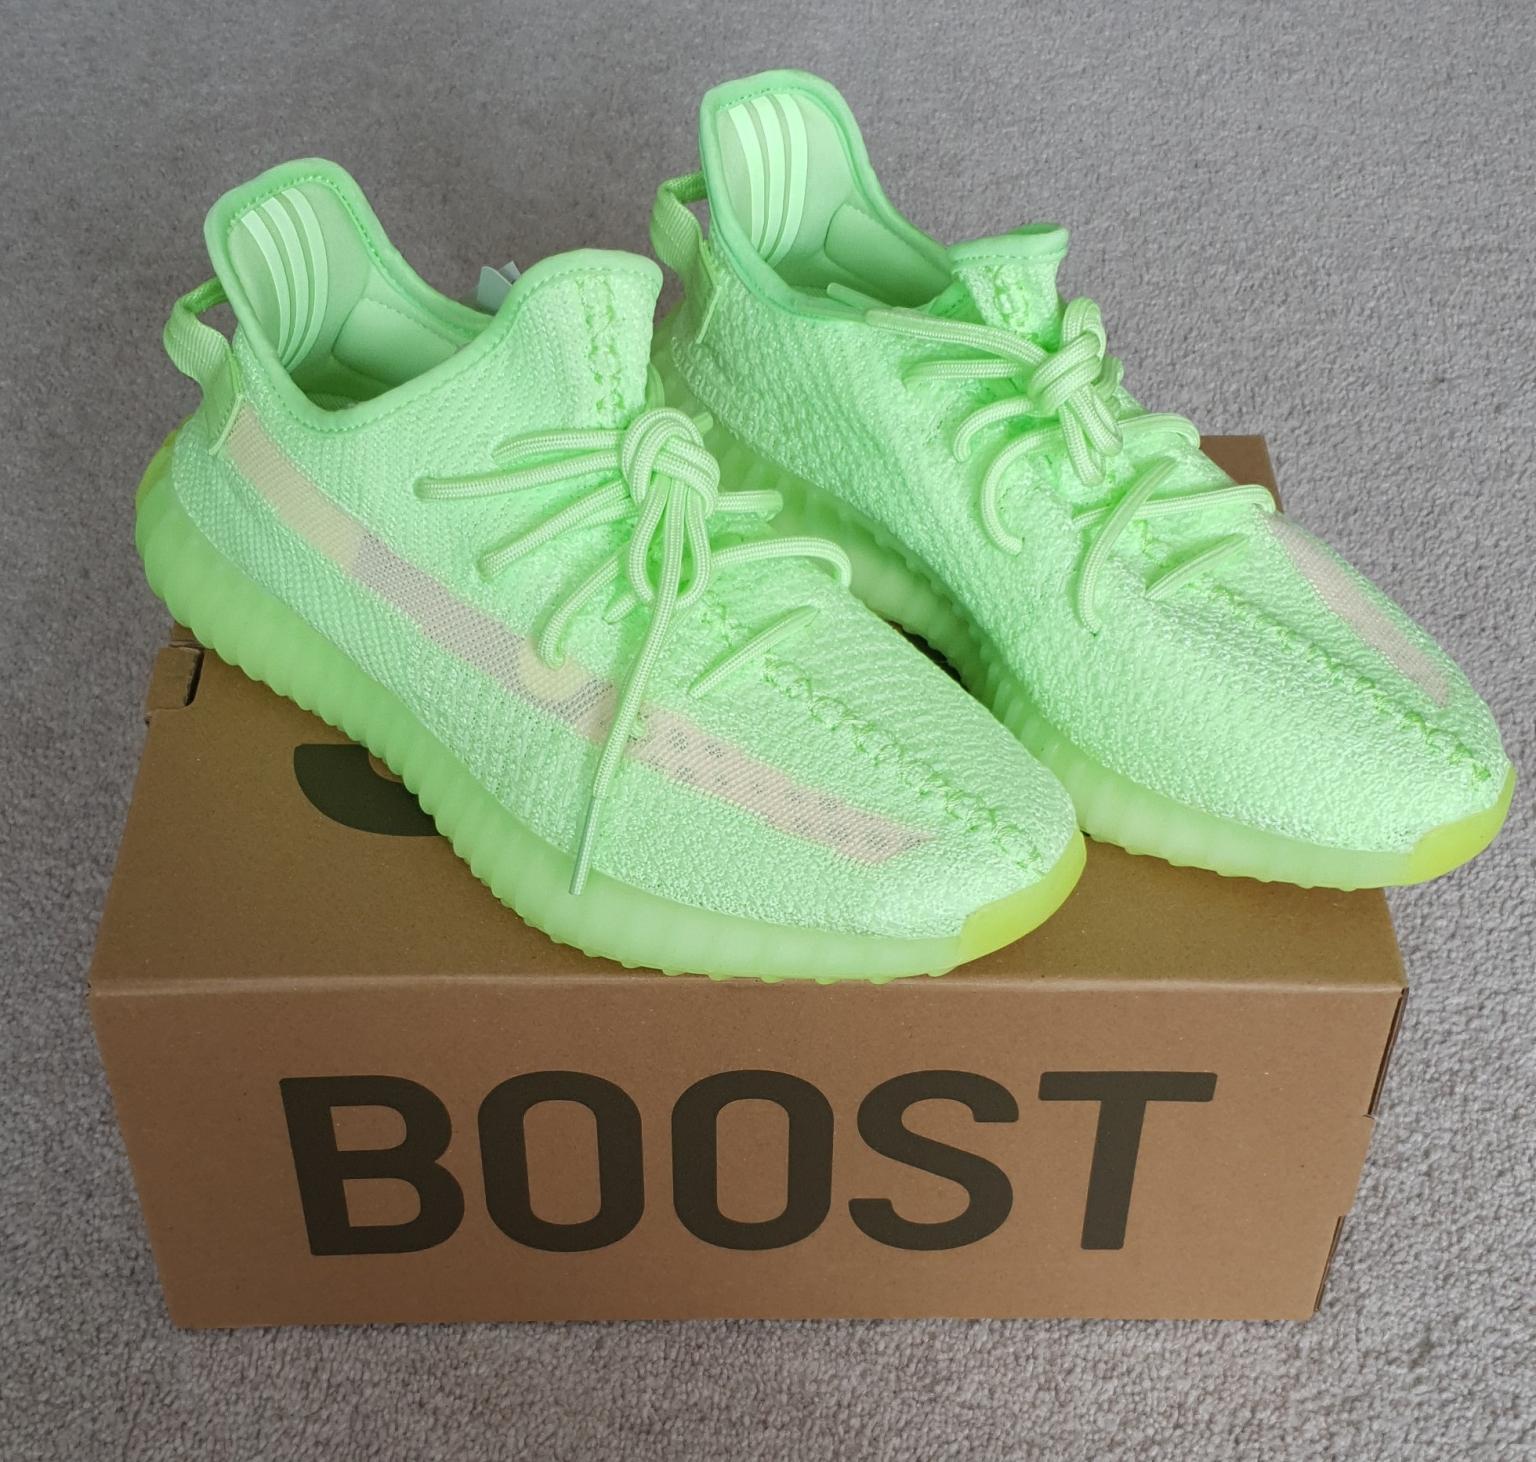 Cheap Vnds Size 5 Adidas Yeezy Boost 350 V2 Beluga 20